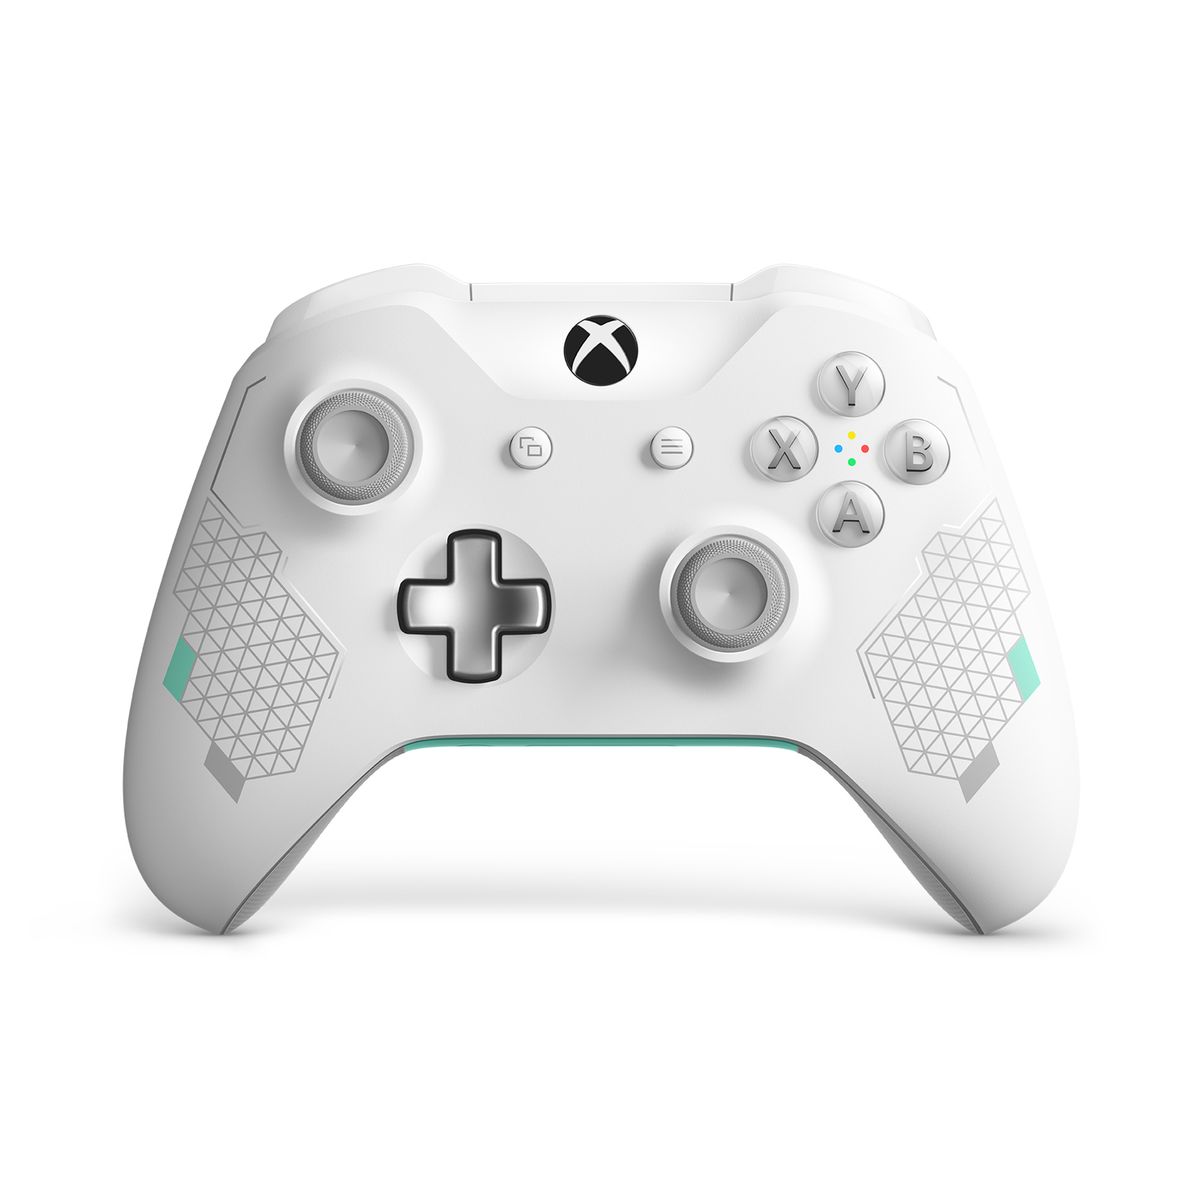 xbox one controller black friday